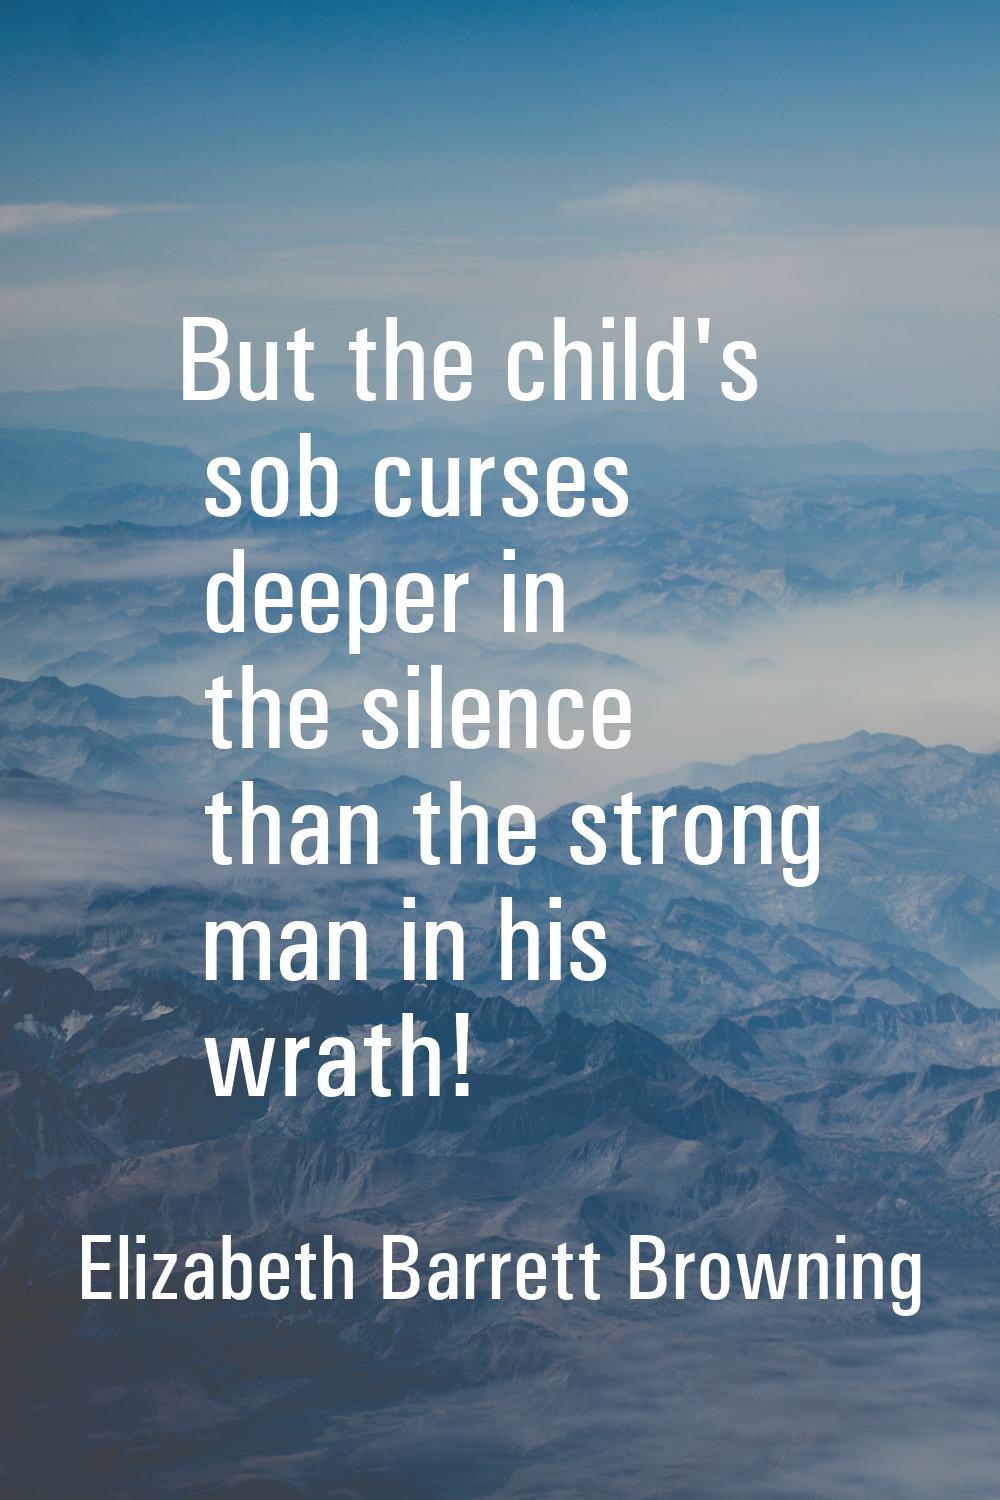 But the child's sob curses deeper in the silence than the strong man in his wrath!